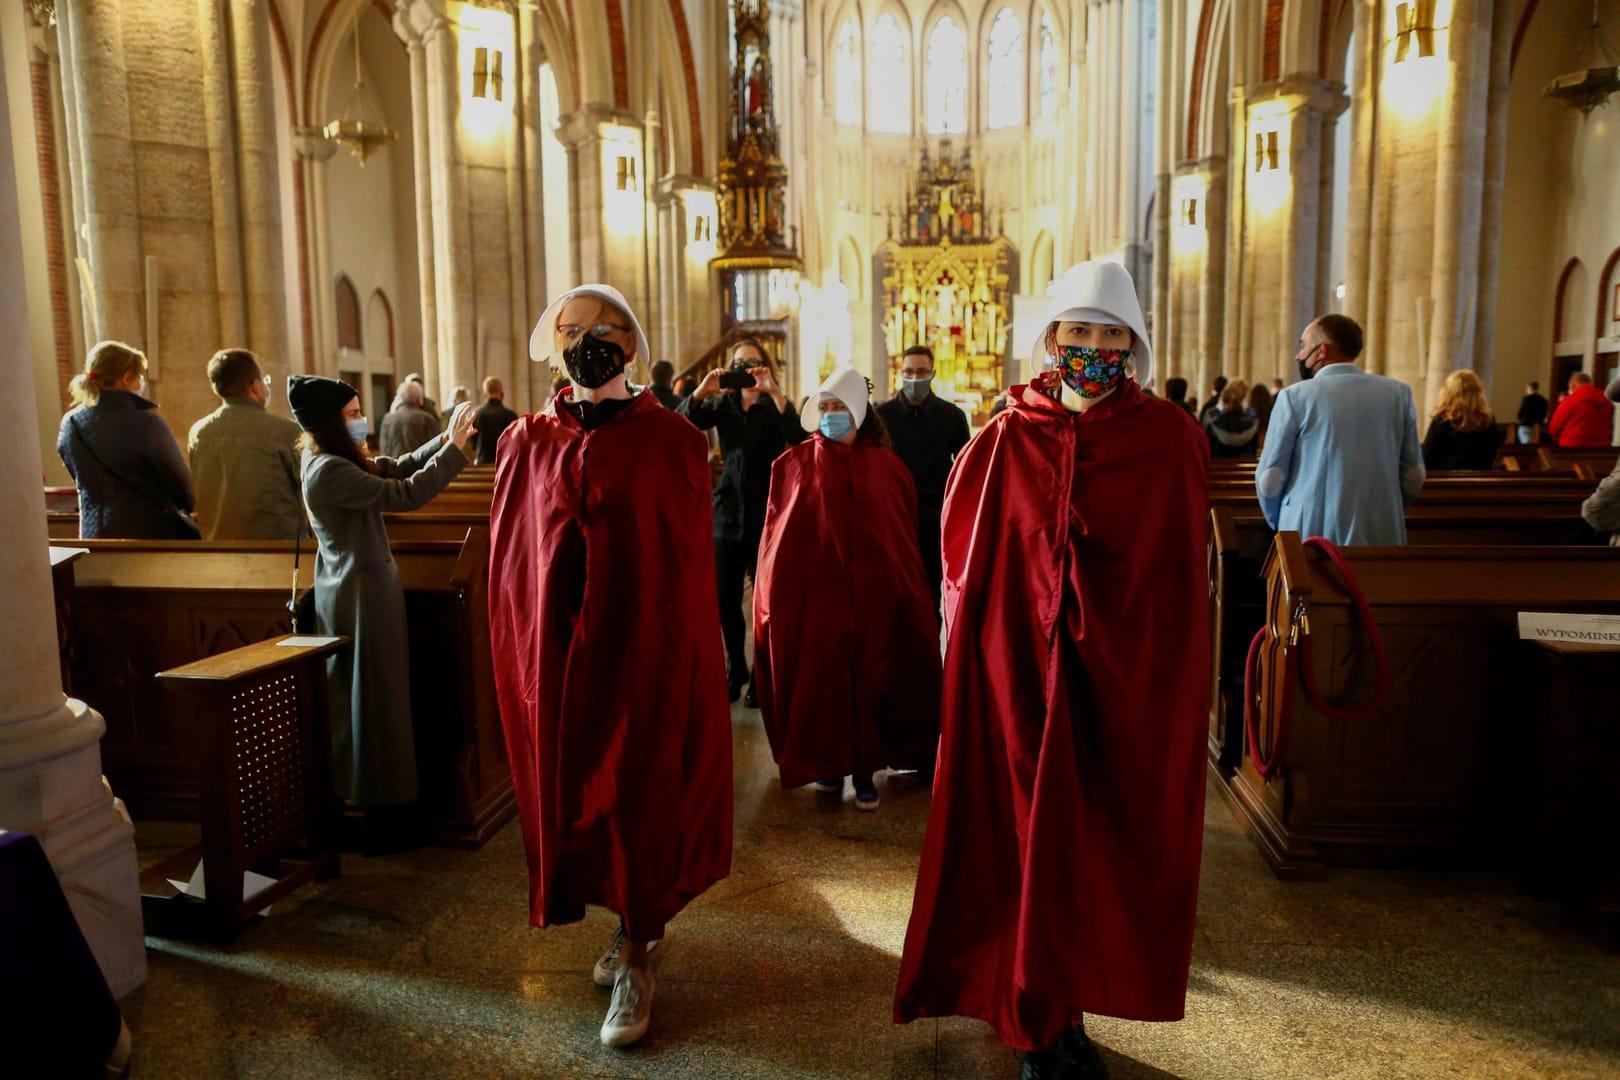 Polish bishops thank citizens for protecting churches